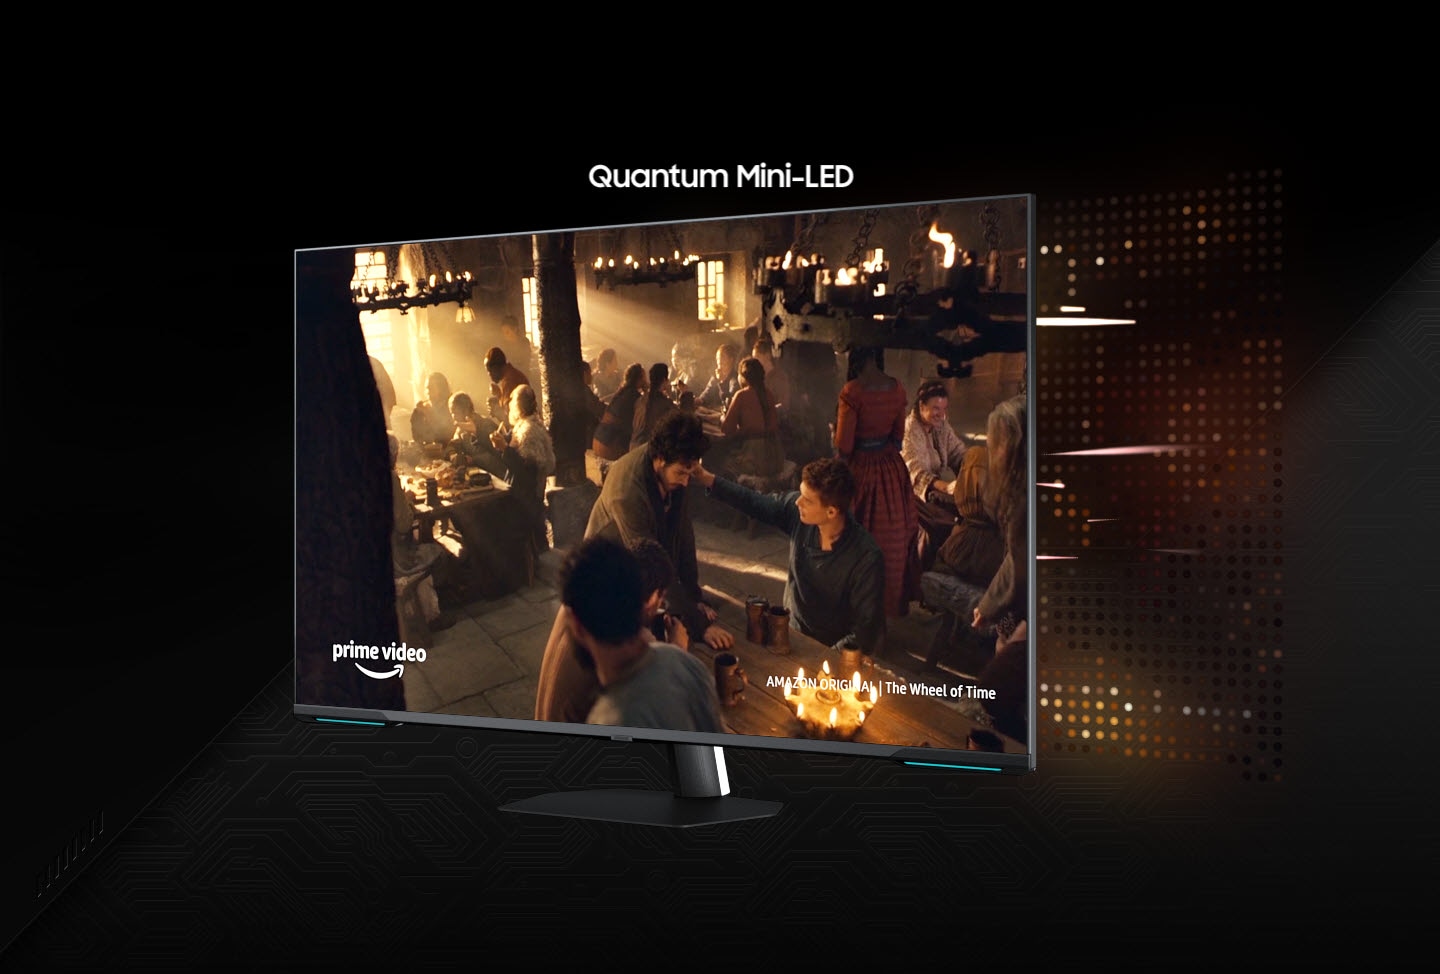 The left side of the monitor screen is divided into Edge LED, and the right side is divided into Quantum Mini-LED. The entire screen changes to Quantum Mini-LED, the monitor rotates and the screen becomes clearer.